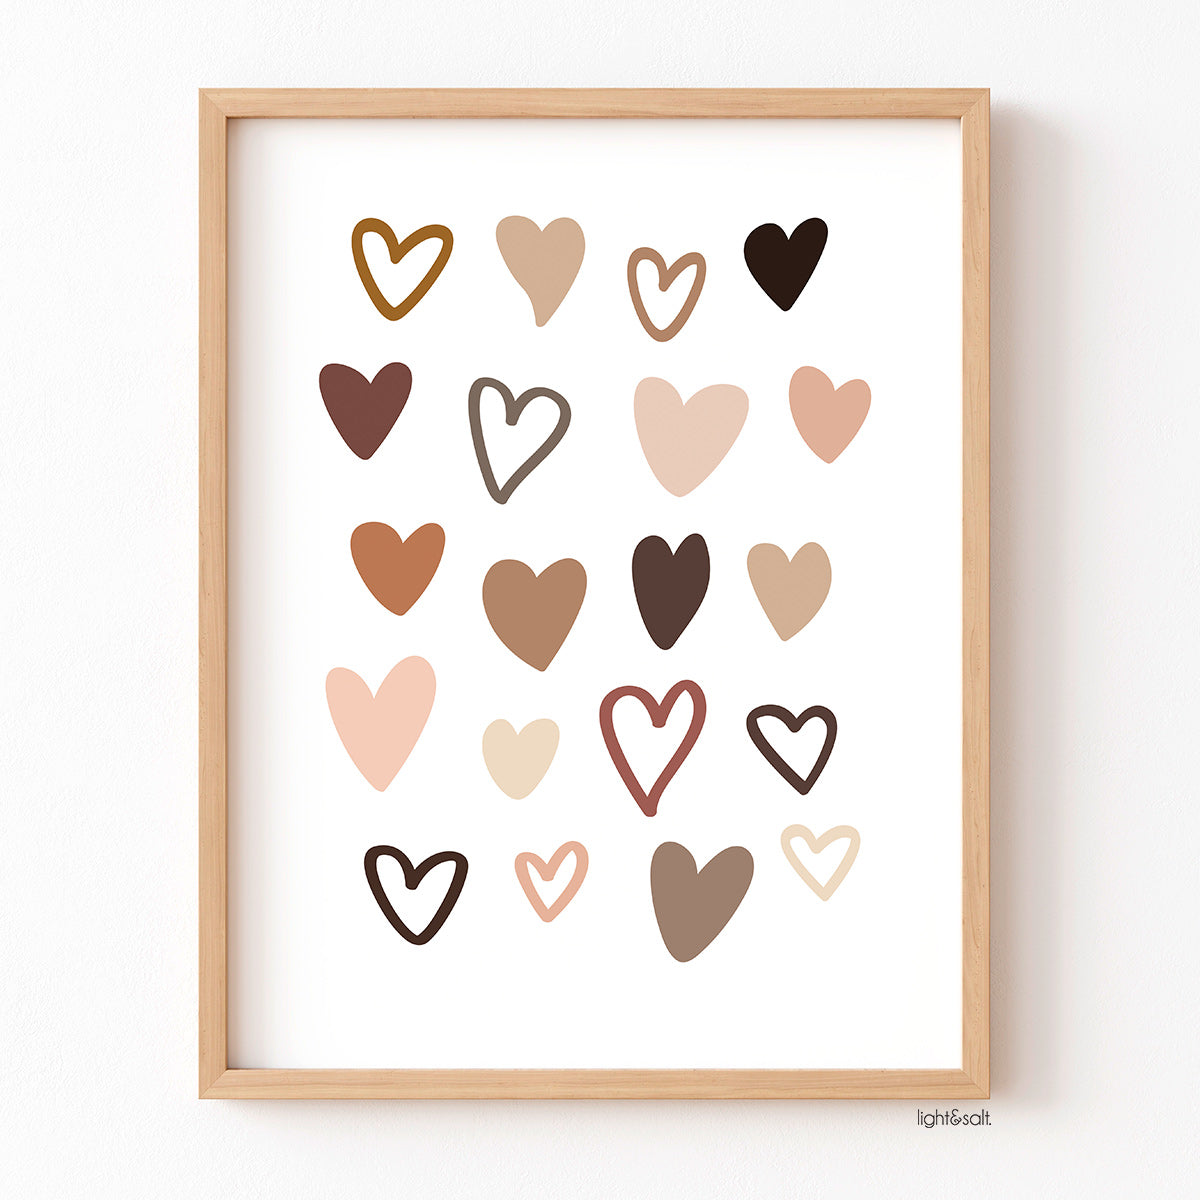 Hearts print, diversity and inclusion